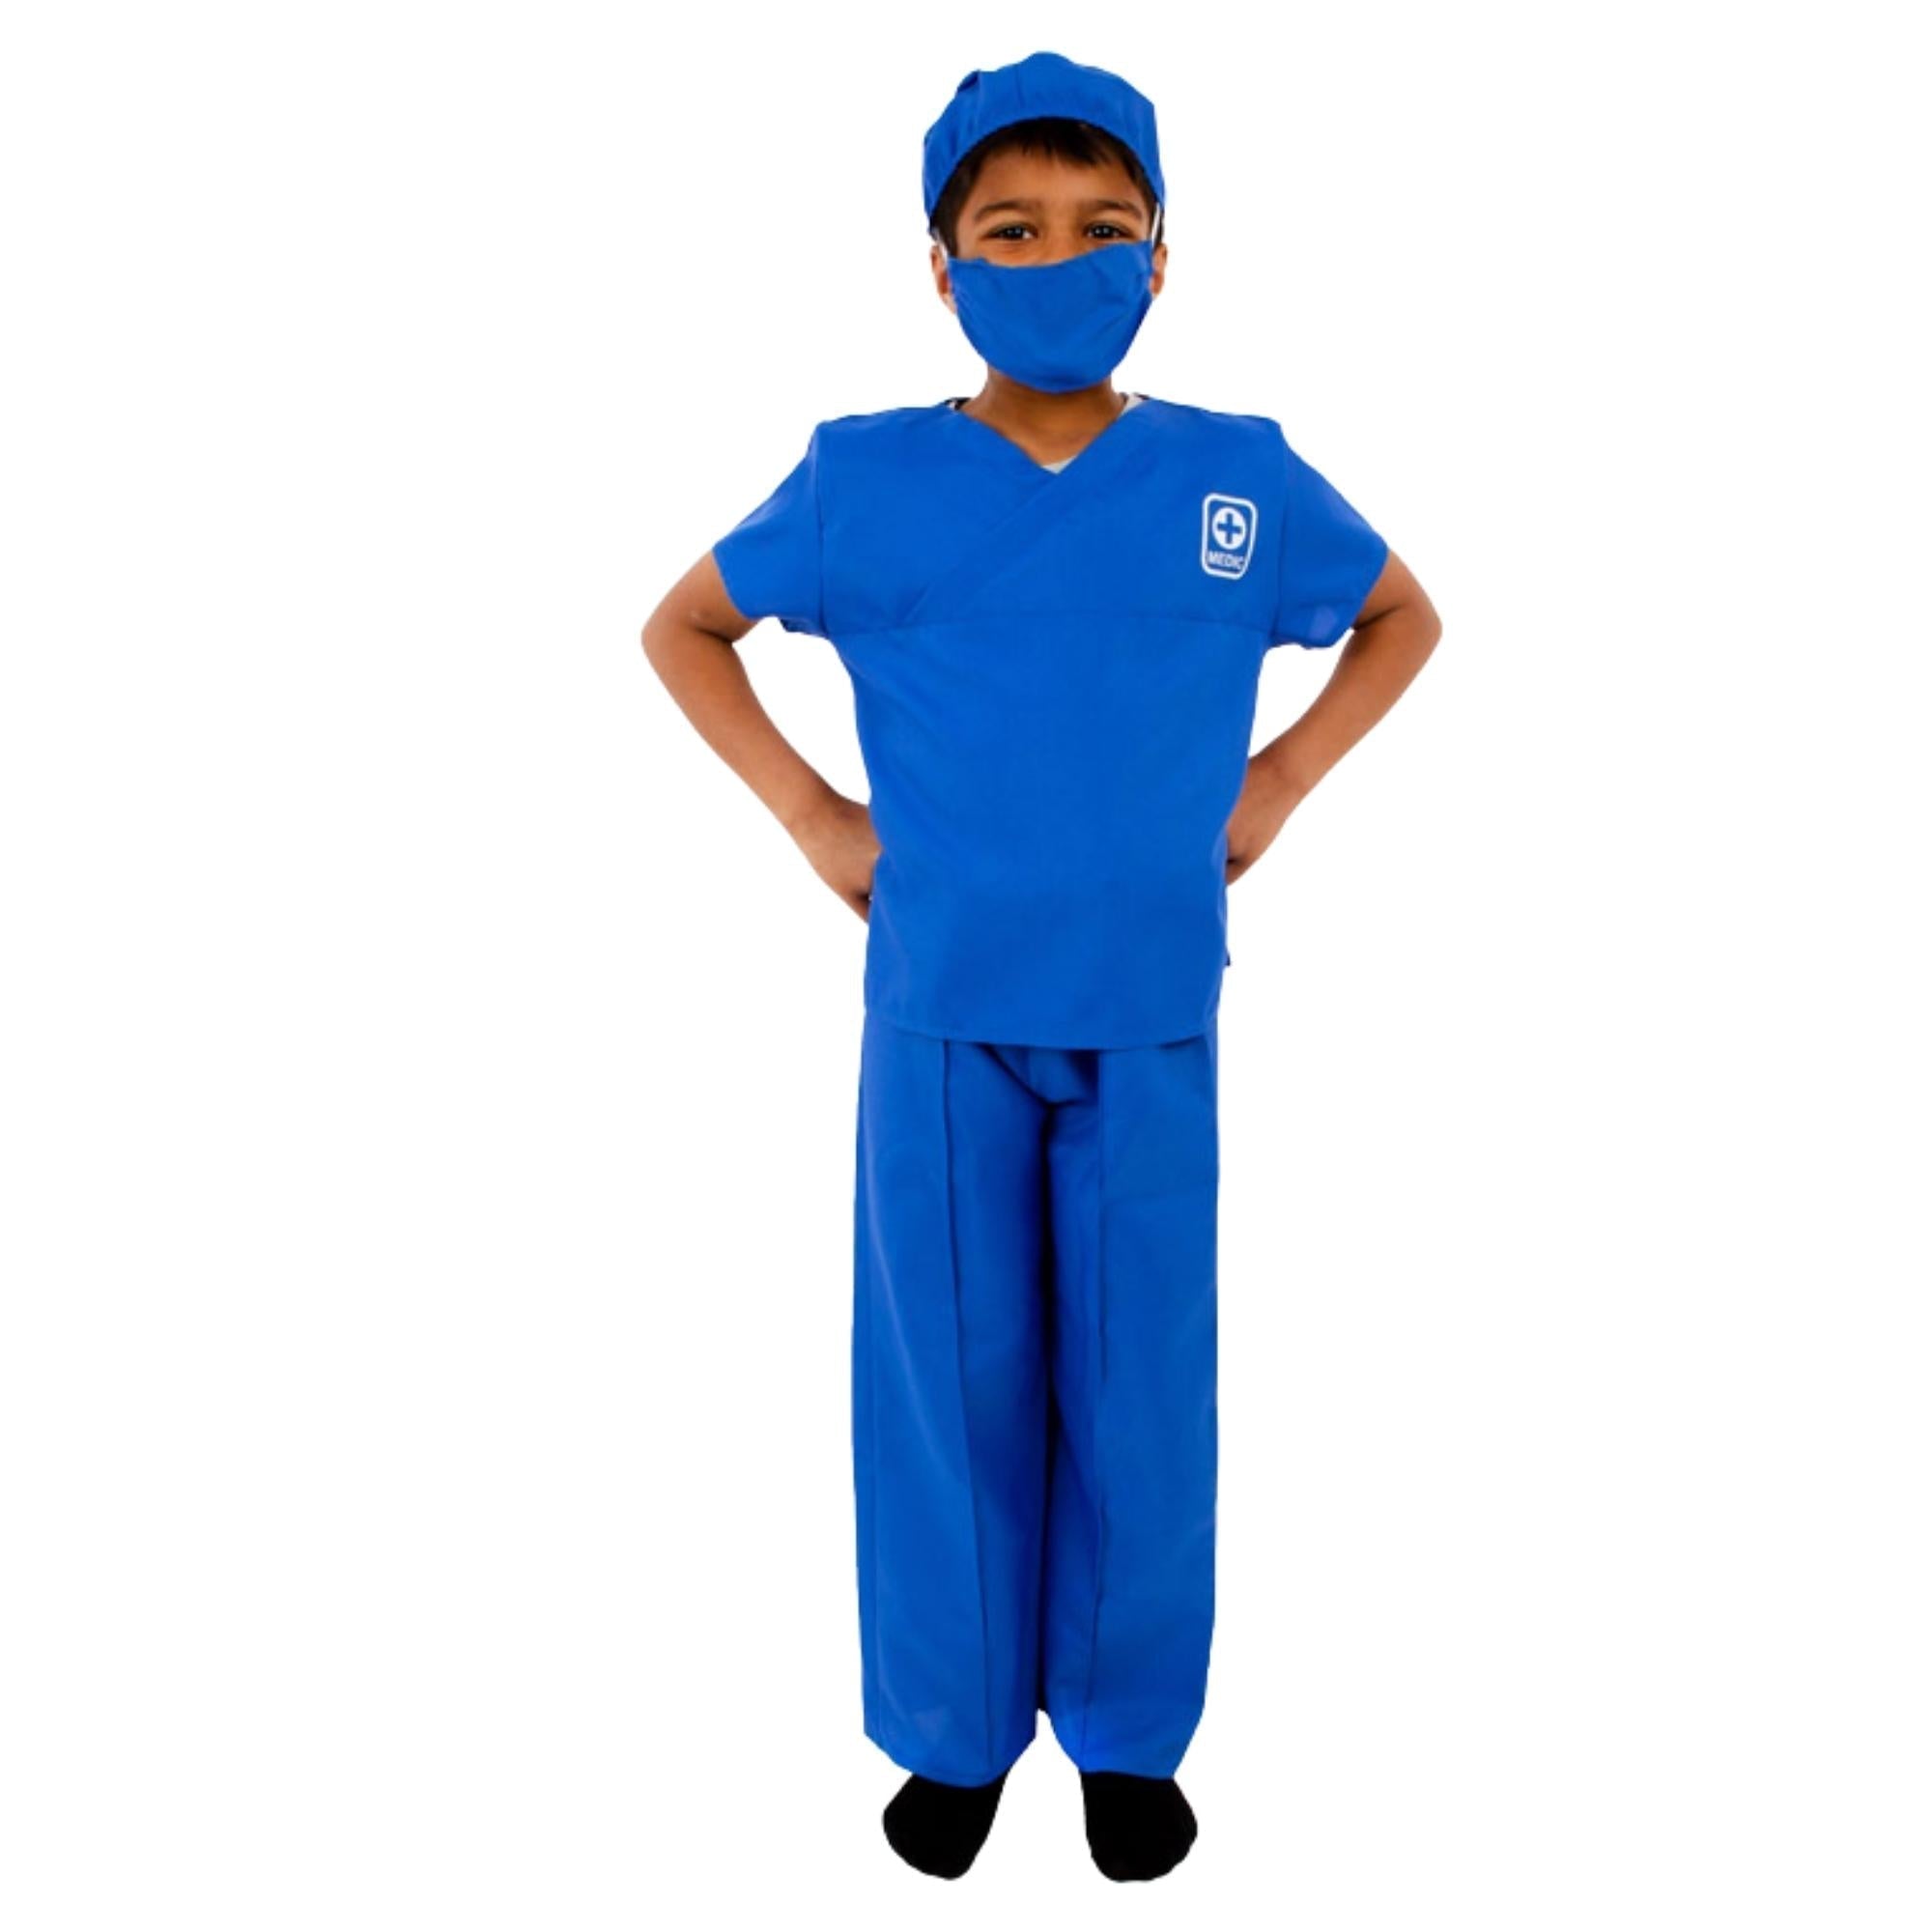 Children's Medic Costume - 3-5 Years, This Children's Medic Costume comprises: polyester, "bi-stretch" elasticated trousers, tunic top with print and one-piece cap and mask. Encourage role play with this realistic, modern dressing up costume. They'll always be on call with this premium and immersive children's surgical medic costume! This very tactile outfit is constructed with authenticity and fun in mind. Let them get caught up in the moment of role play thanks to detailing such as the realistic cutaway s